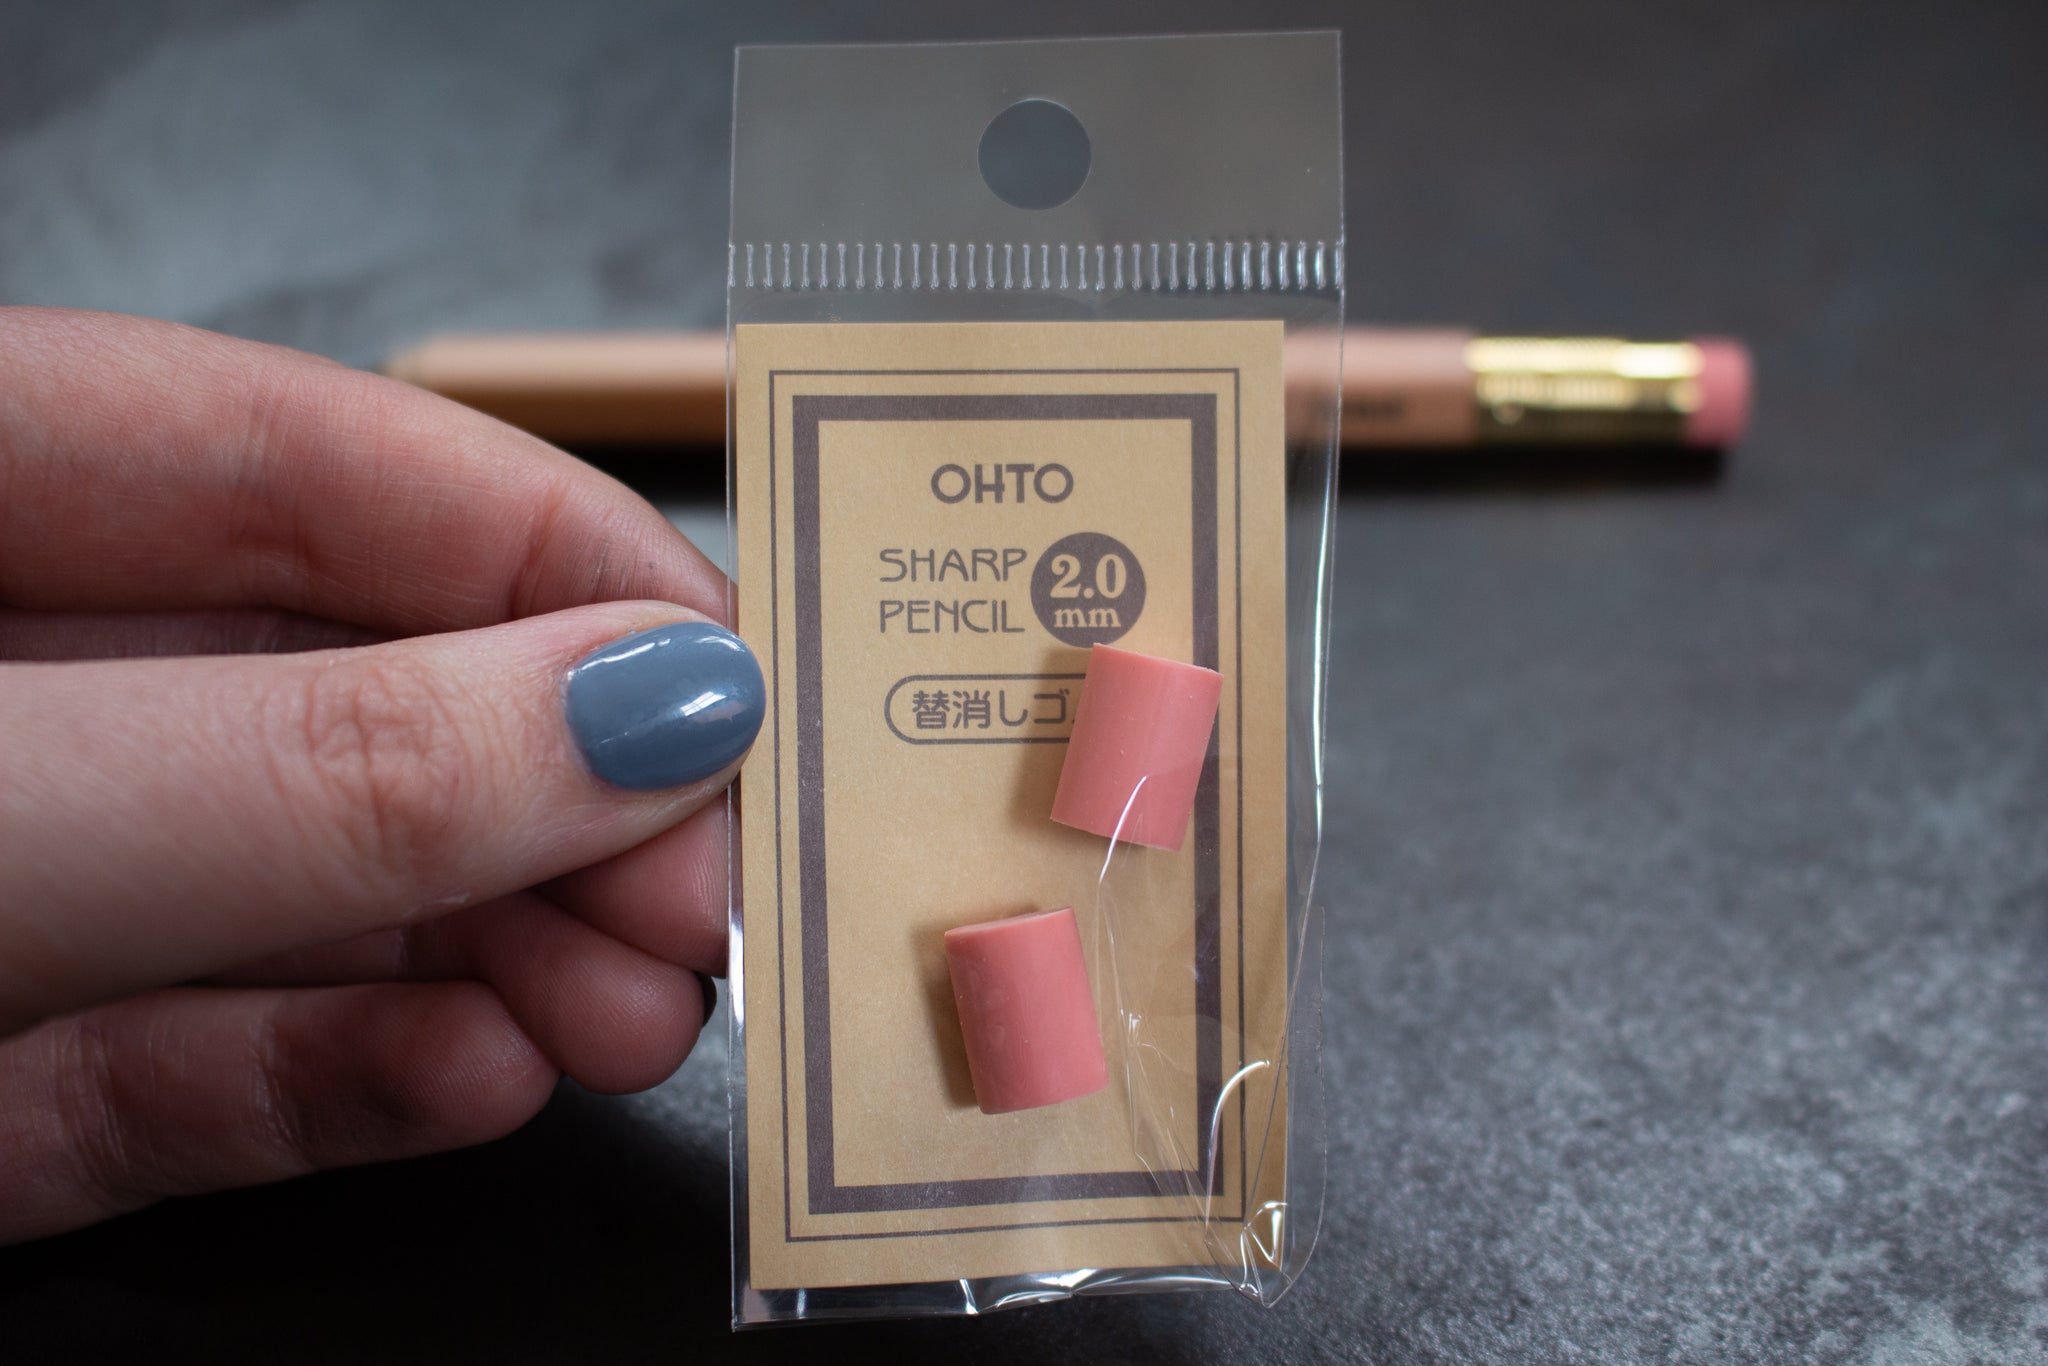 OHTO Sharp Pencil 2.0mm Replacement Erasers